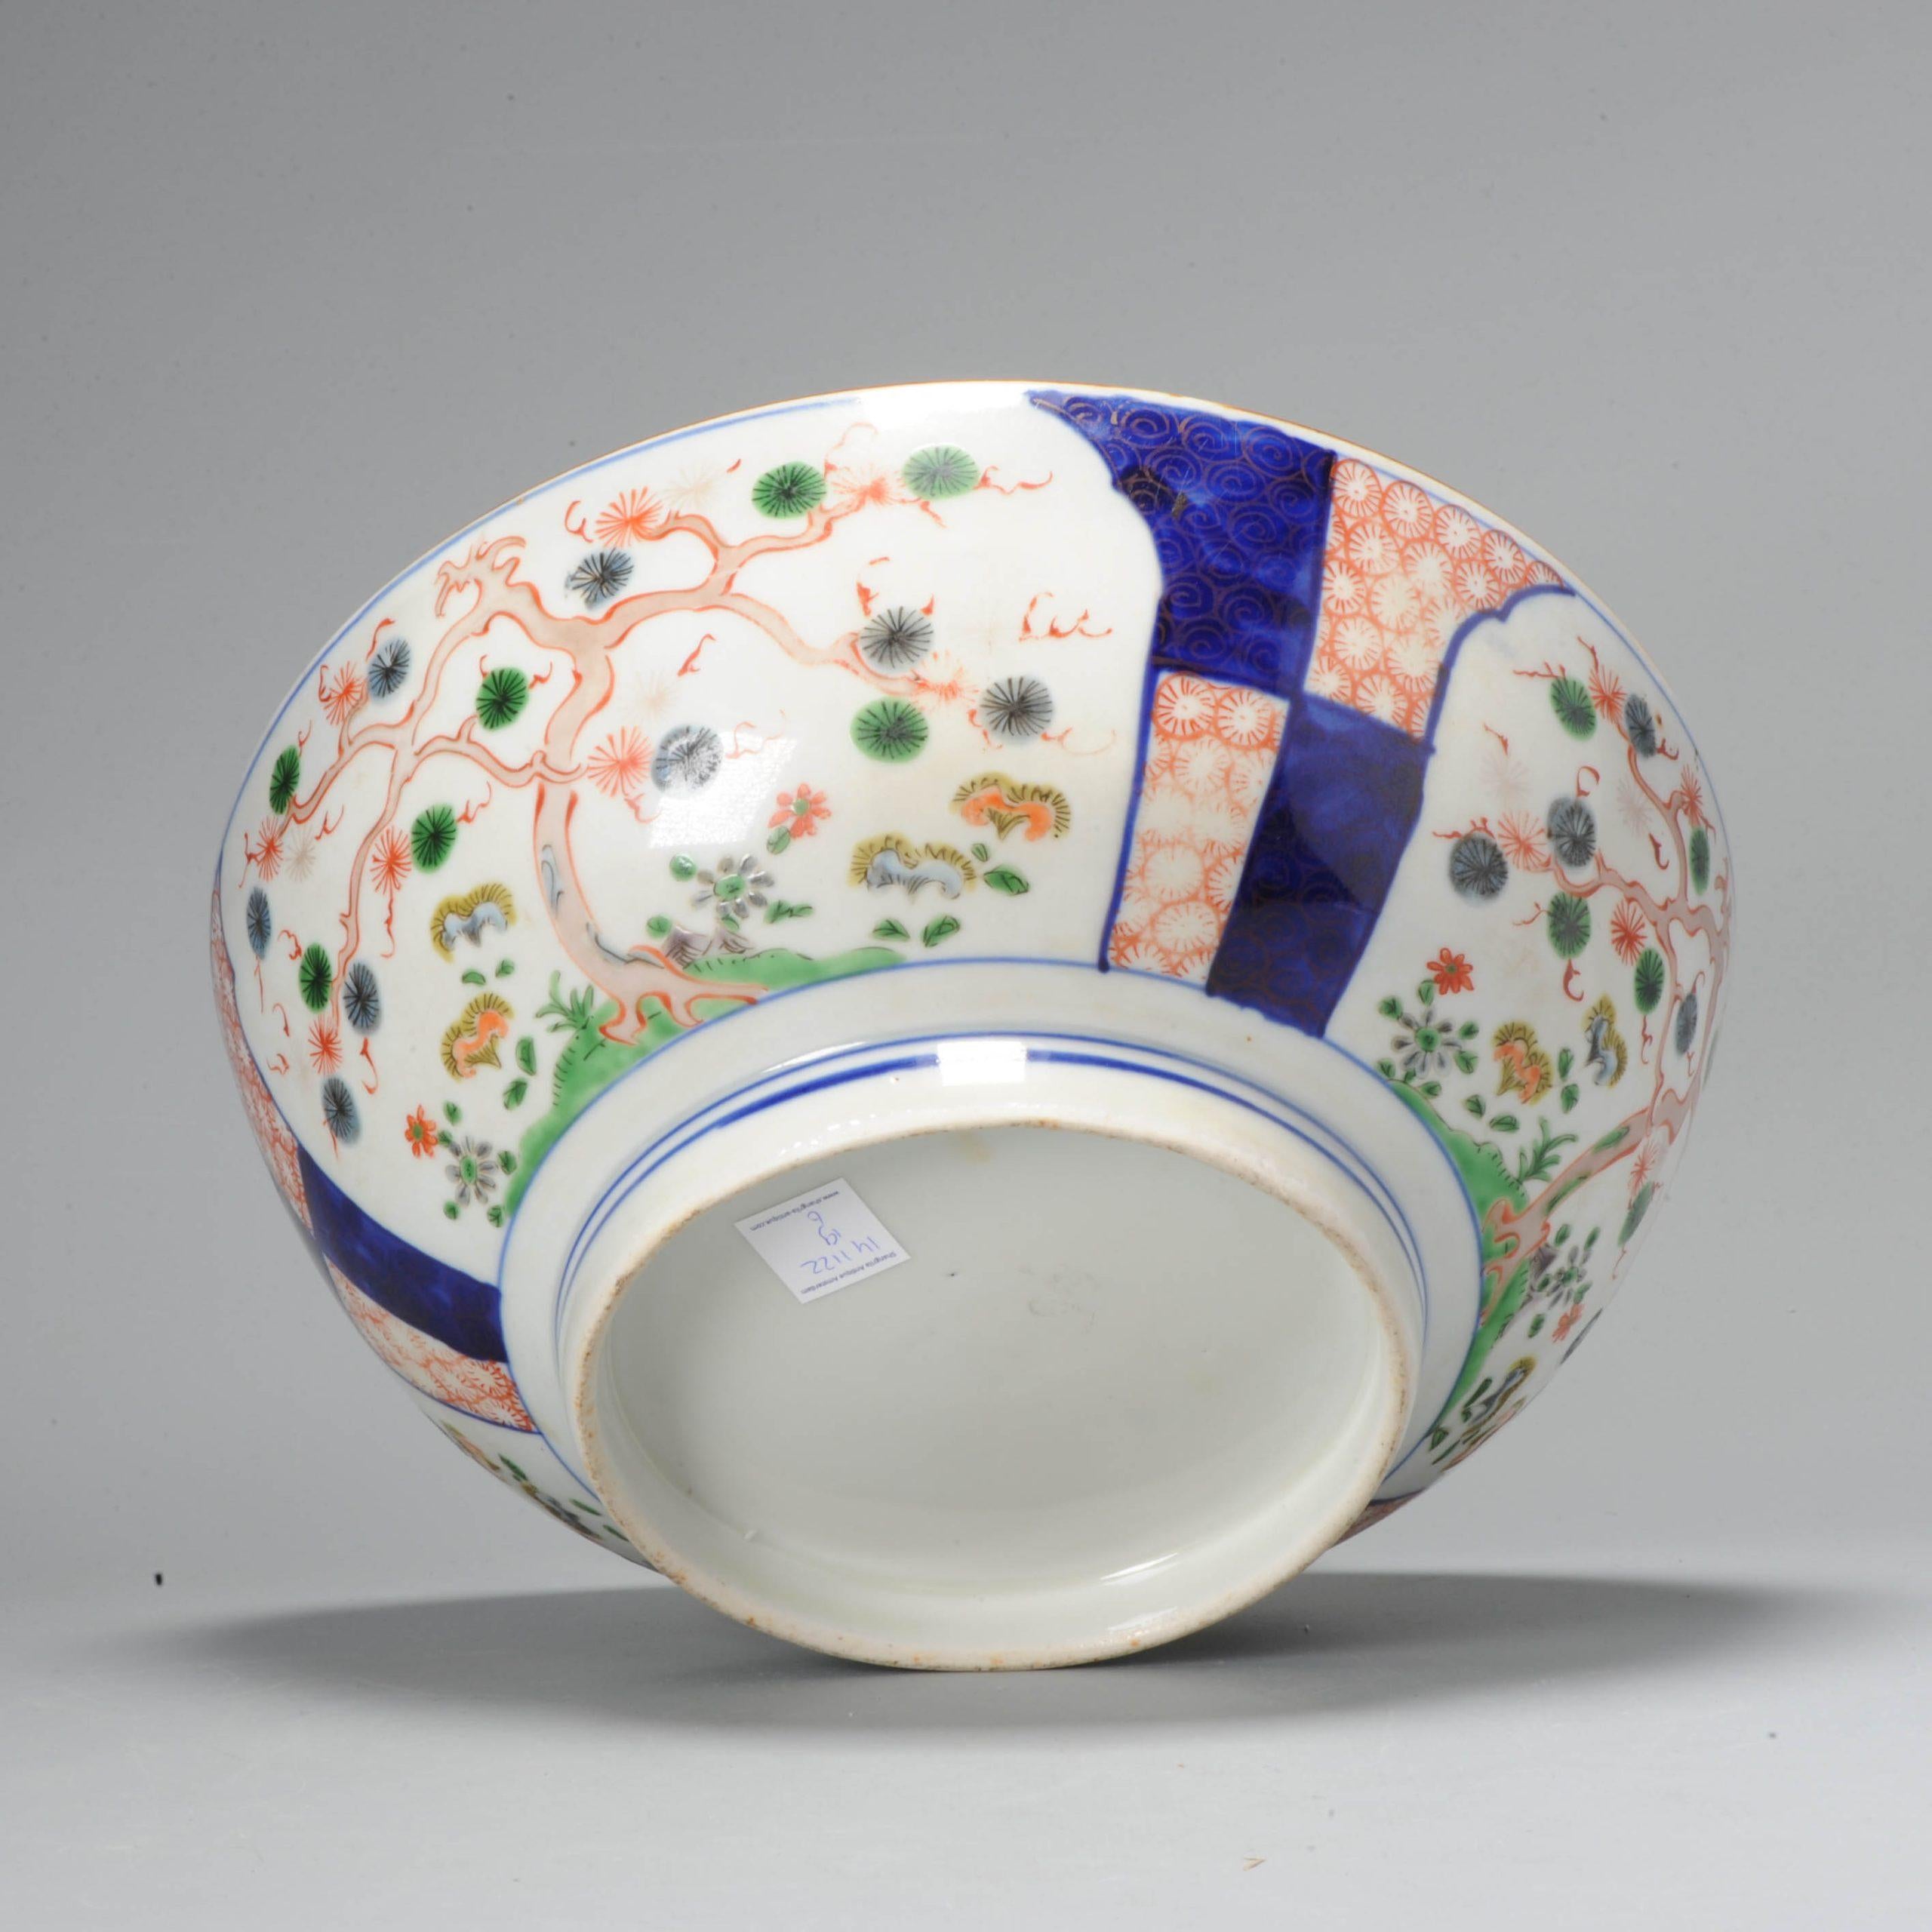 A Beautiful and Large Japanese Porcelain Imari Bowl Japan Antique, 19th Century For Sale 1